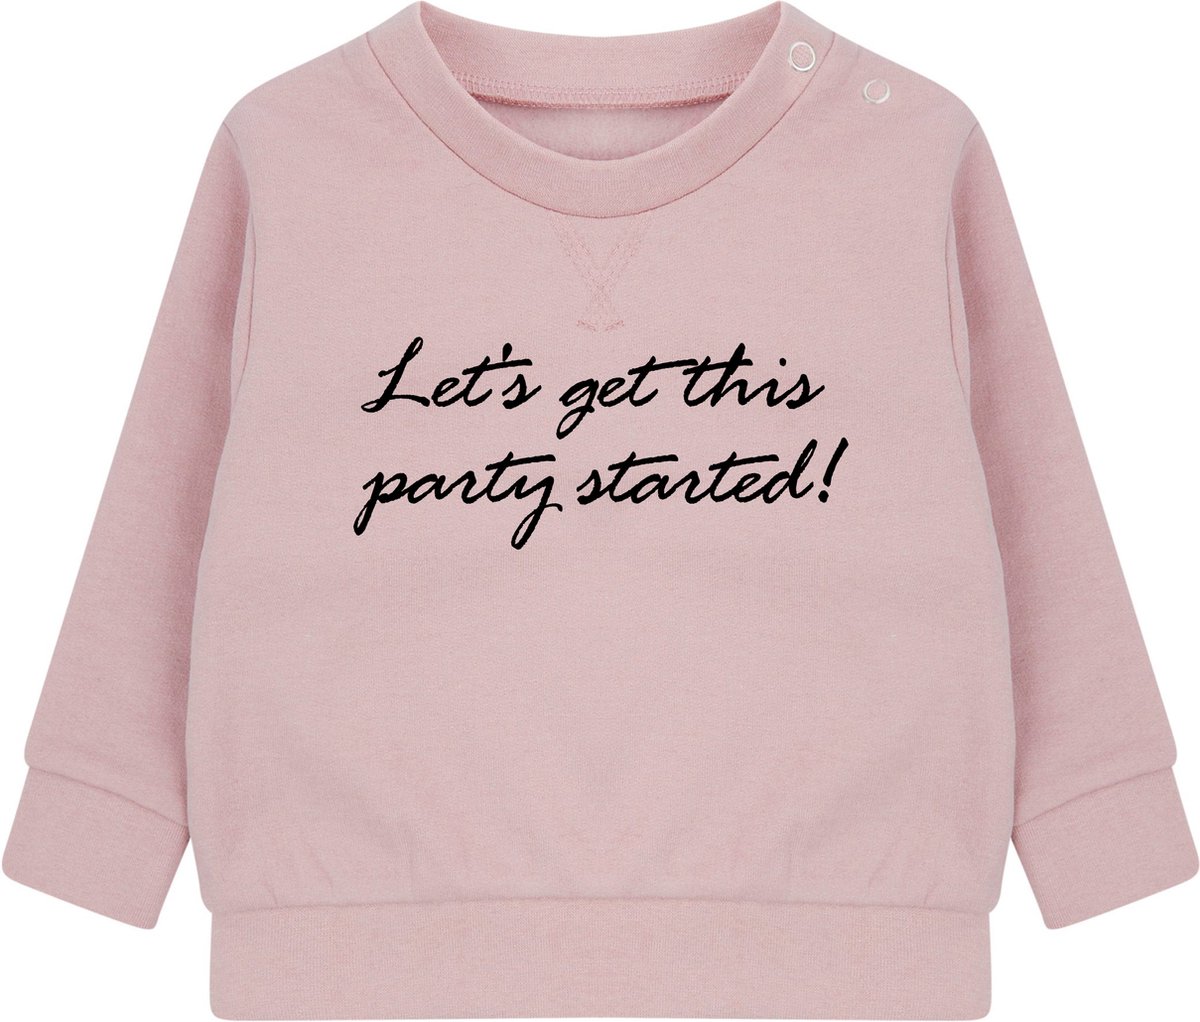 Sweater Kids - Roze MT 18-24 MND MT 92 - Let's Get This Party Started - Duurzame Kinderkleding